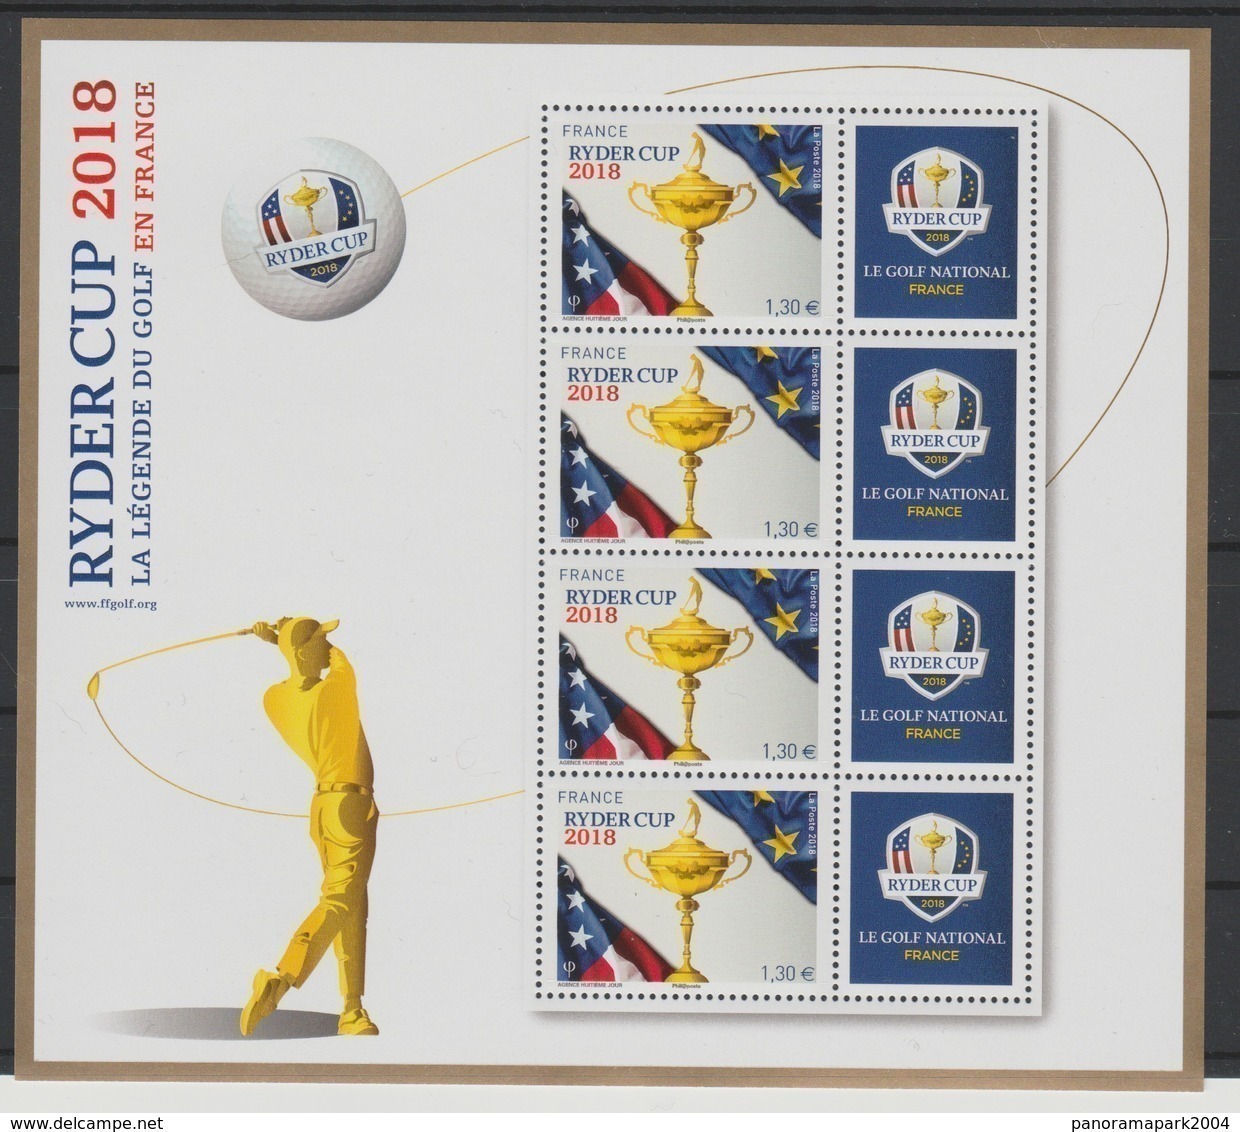 France 2018 - BF YT N°142 Mini-feuillet Bloc 4 Timbres Ryder Cup Golf LUXE MNH RARE ! Tirage 30 000 - Mint/Hinged